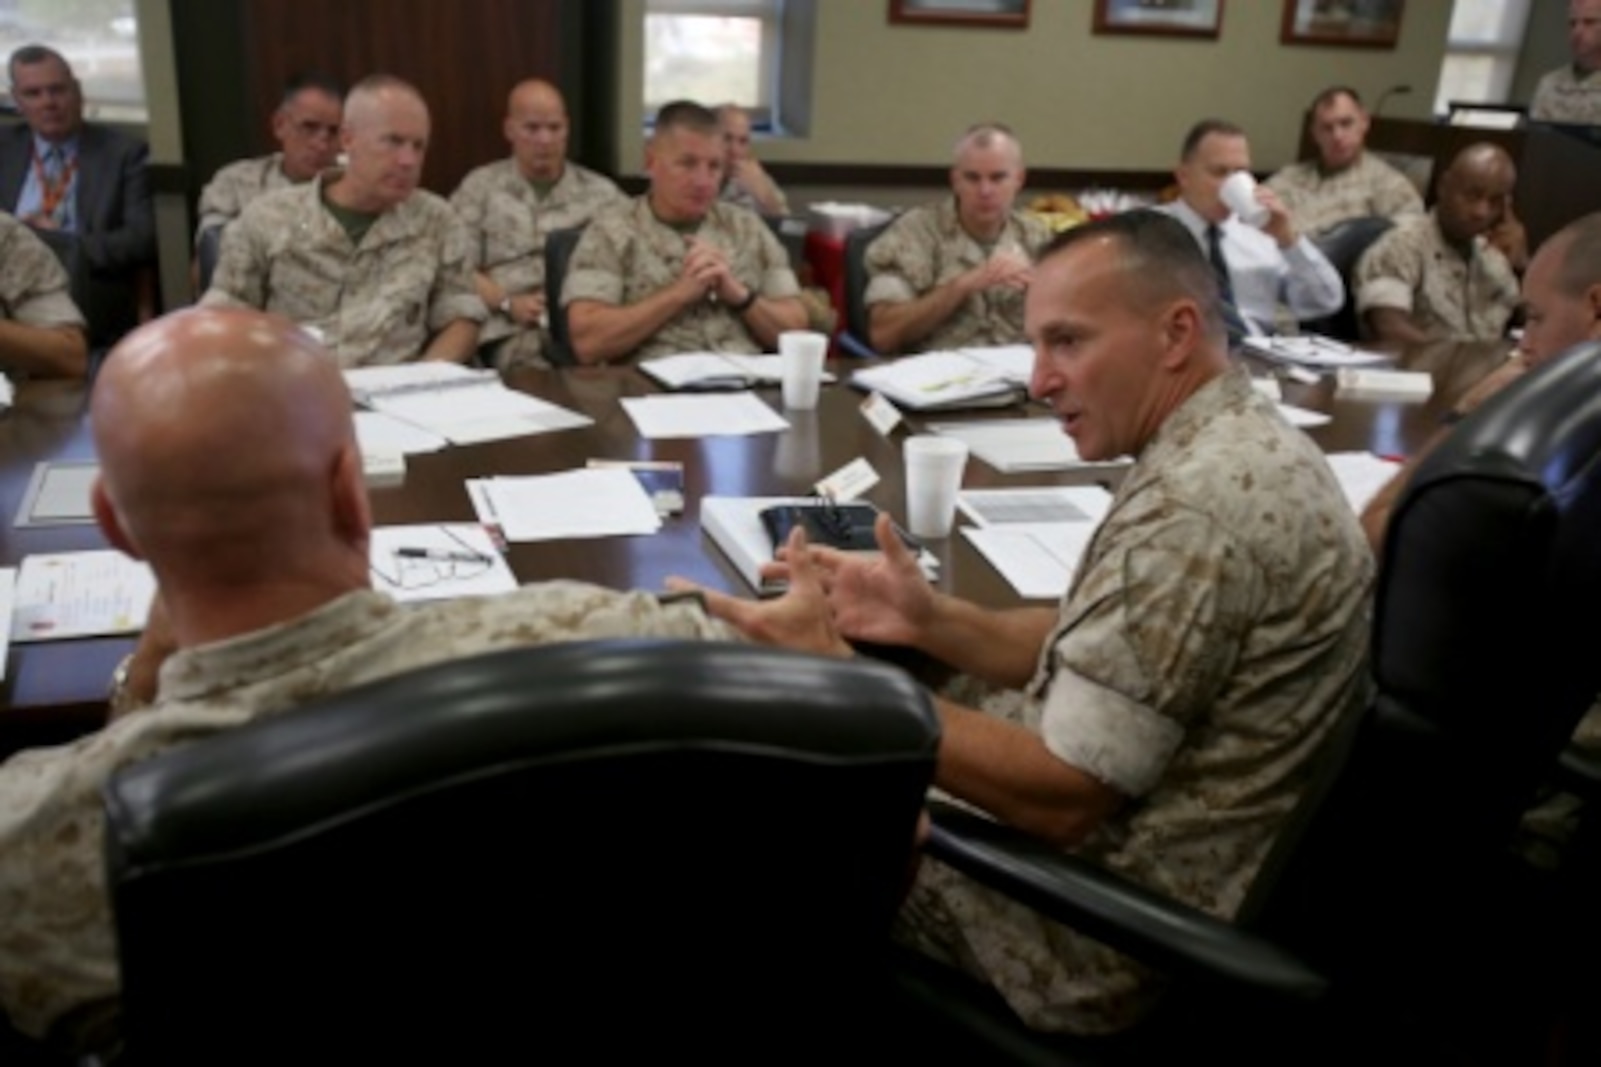 Brigadier General David A. Ottignon, commanding general, 1st Marine Logistics Group, and Brig. General Charles G. Chiarotti, commanding general, 2nd MLG, discuss organizational details during a Quad MLG Conference where the commanding generals of the four Marine Logistics Groups came together in an effort to plan for future organization and logistic changes that will affect their units, aboard Camp Pendleton Calif., Oct. 7, 2015. The four general officers discussed various topics and proposed plans that will help them stay on the same page while simultaneously operating within their specific operational capabilities and capacities.